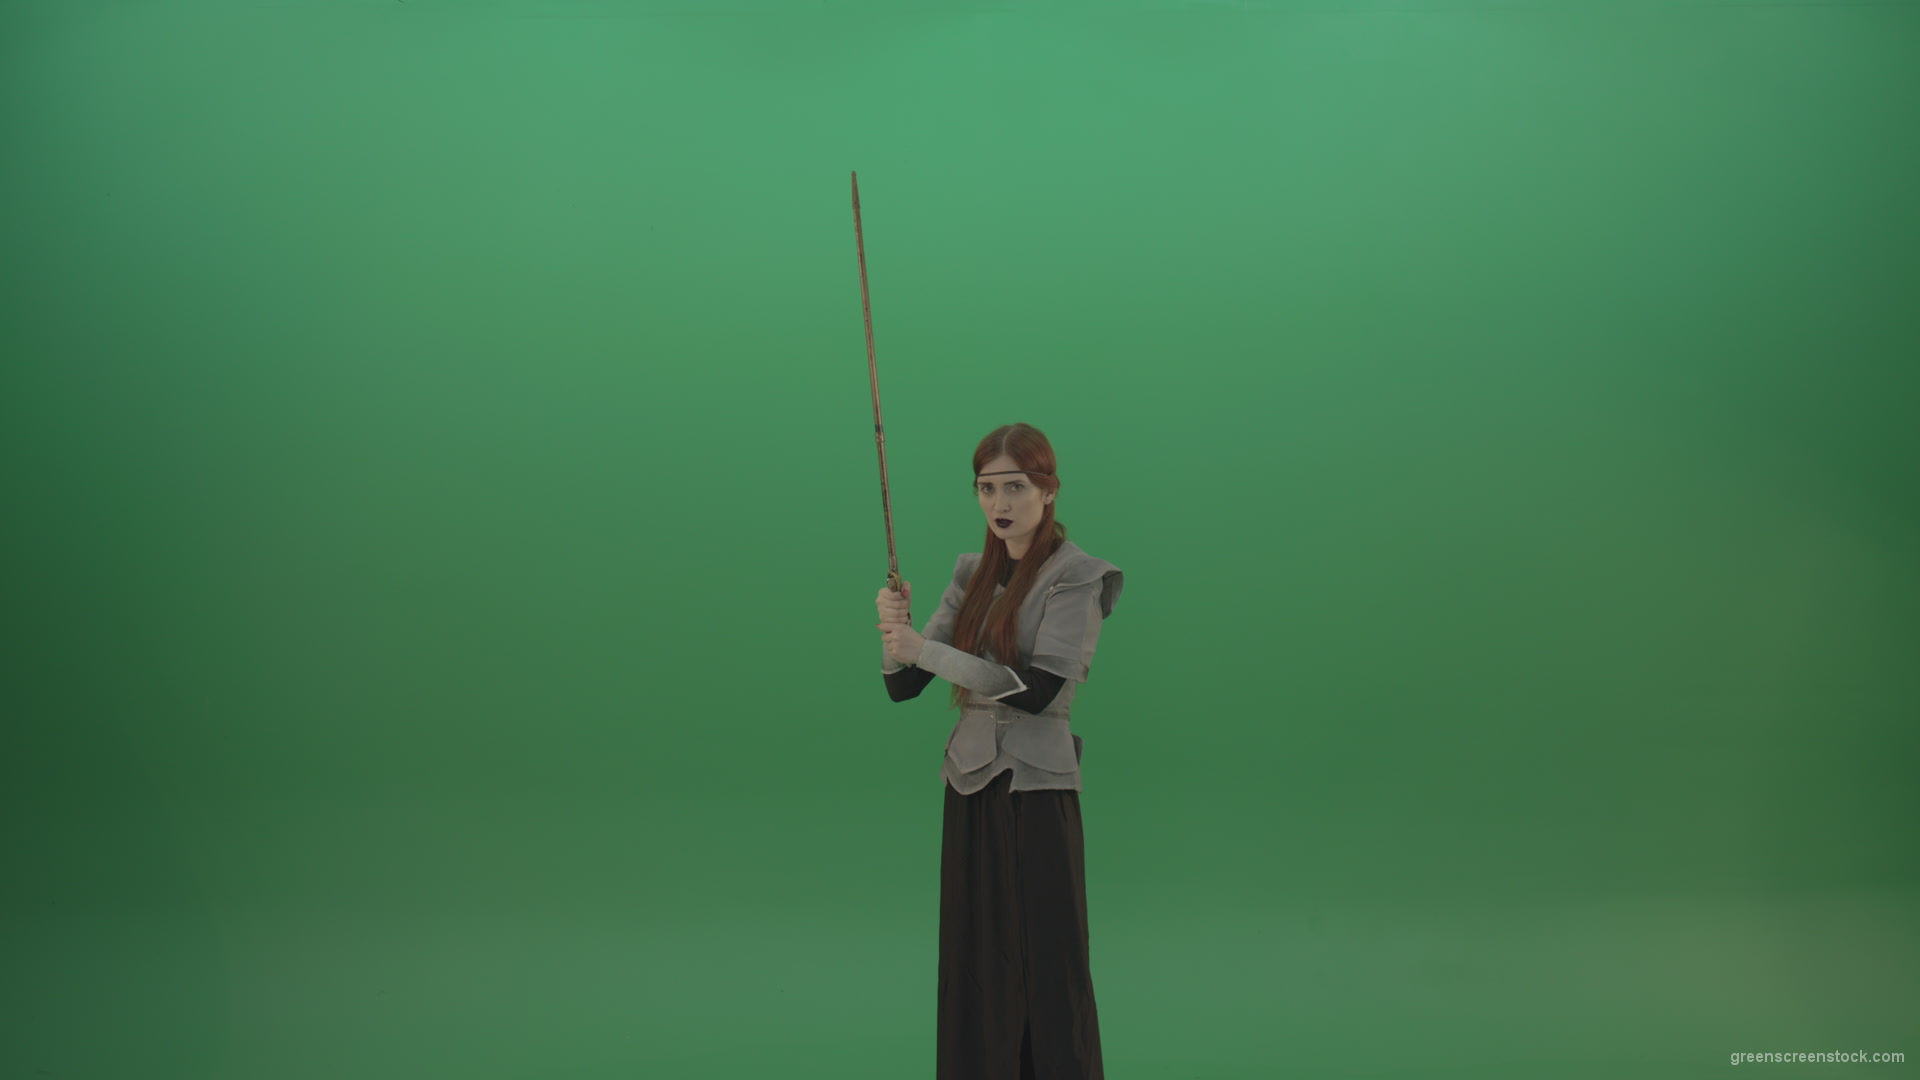 Girl-shouts-her-foes-on-an-offensive-raising-a-sword-up-on-a-green-background_001 Green Screen Stock